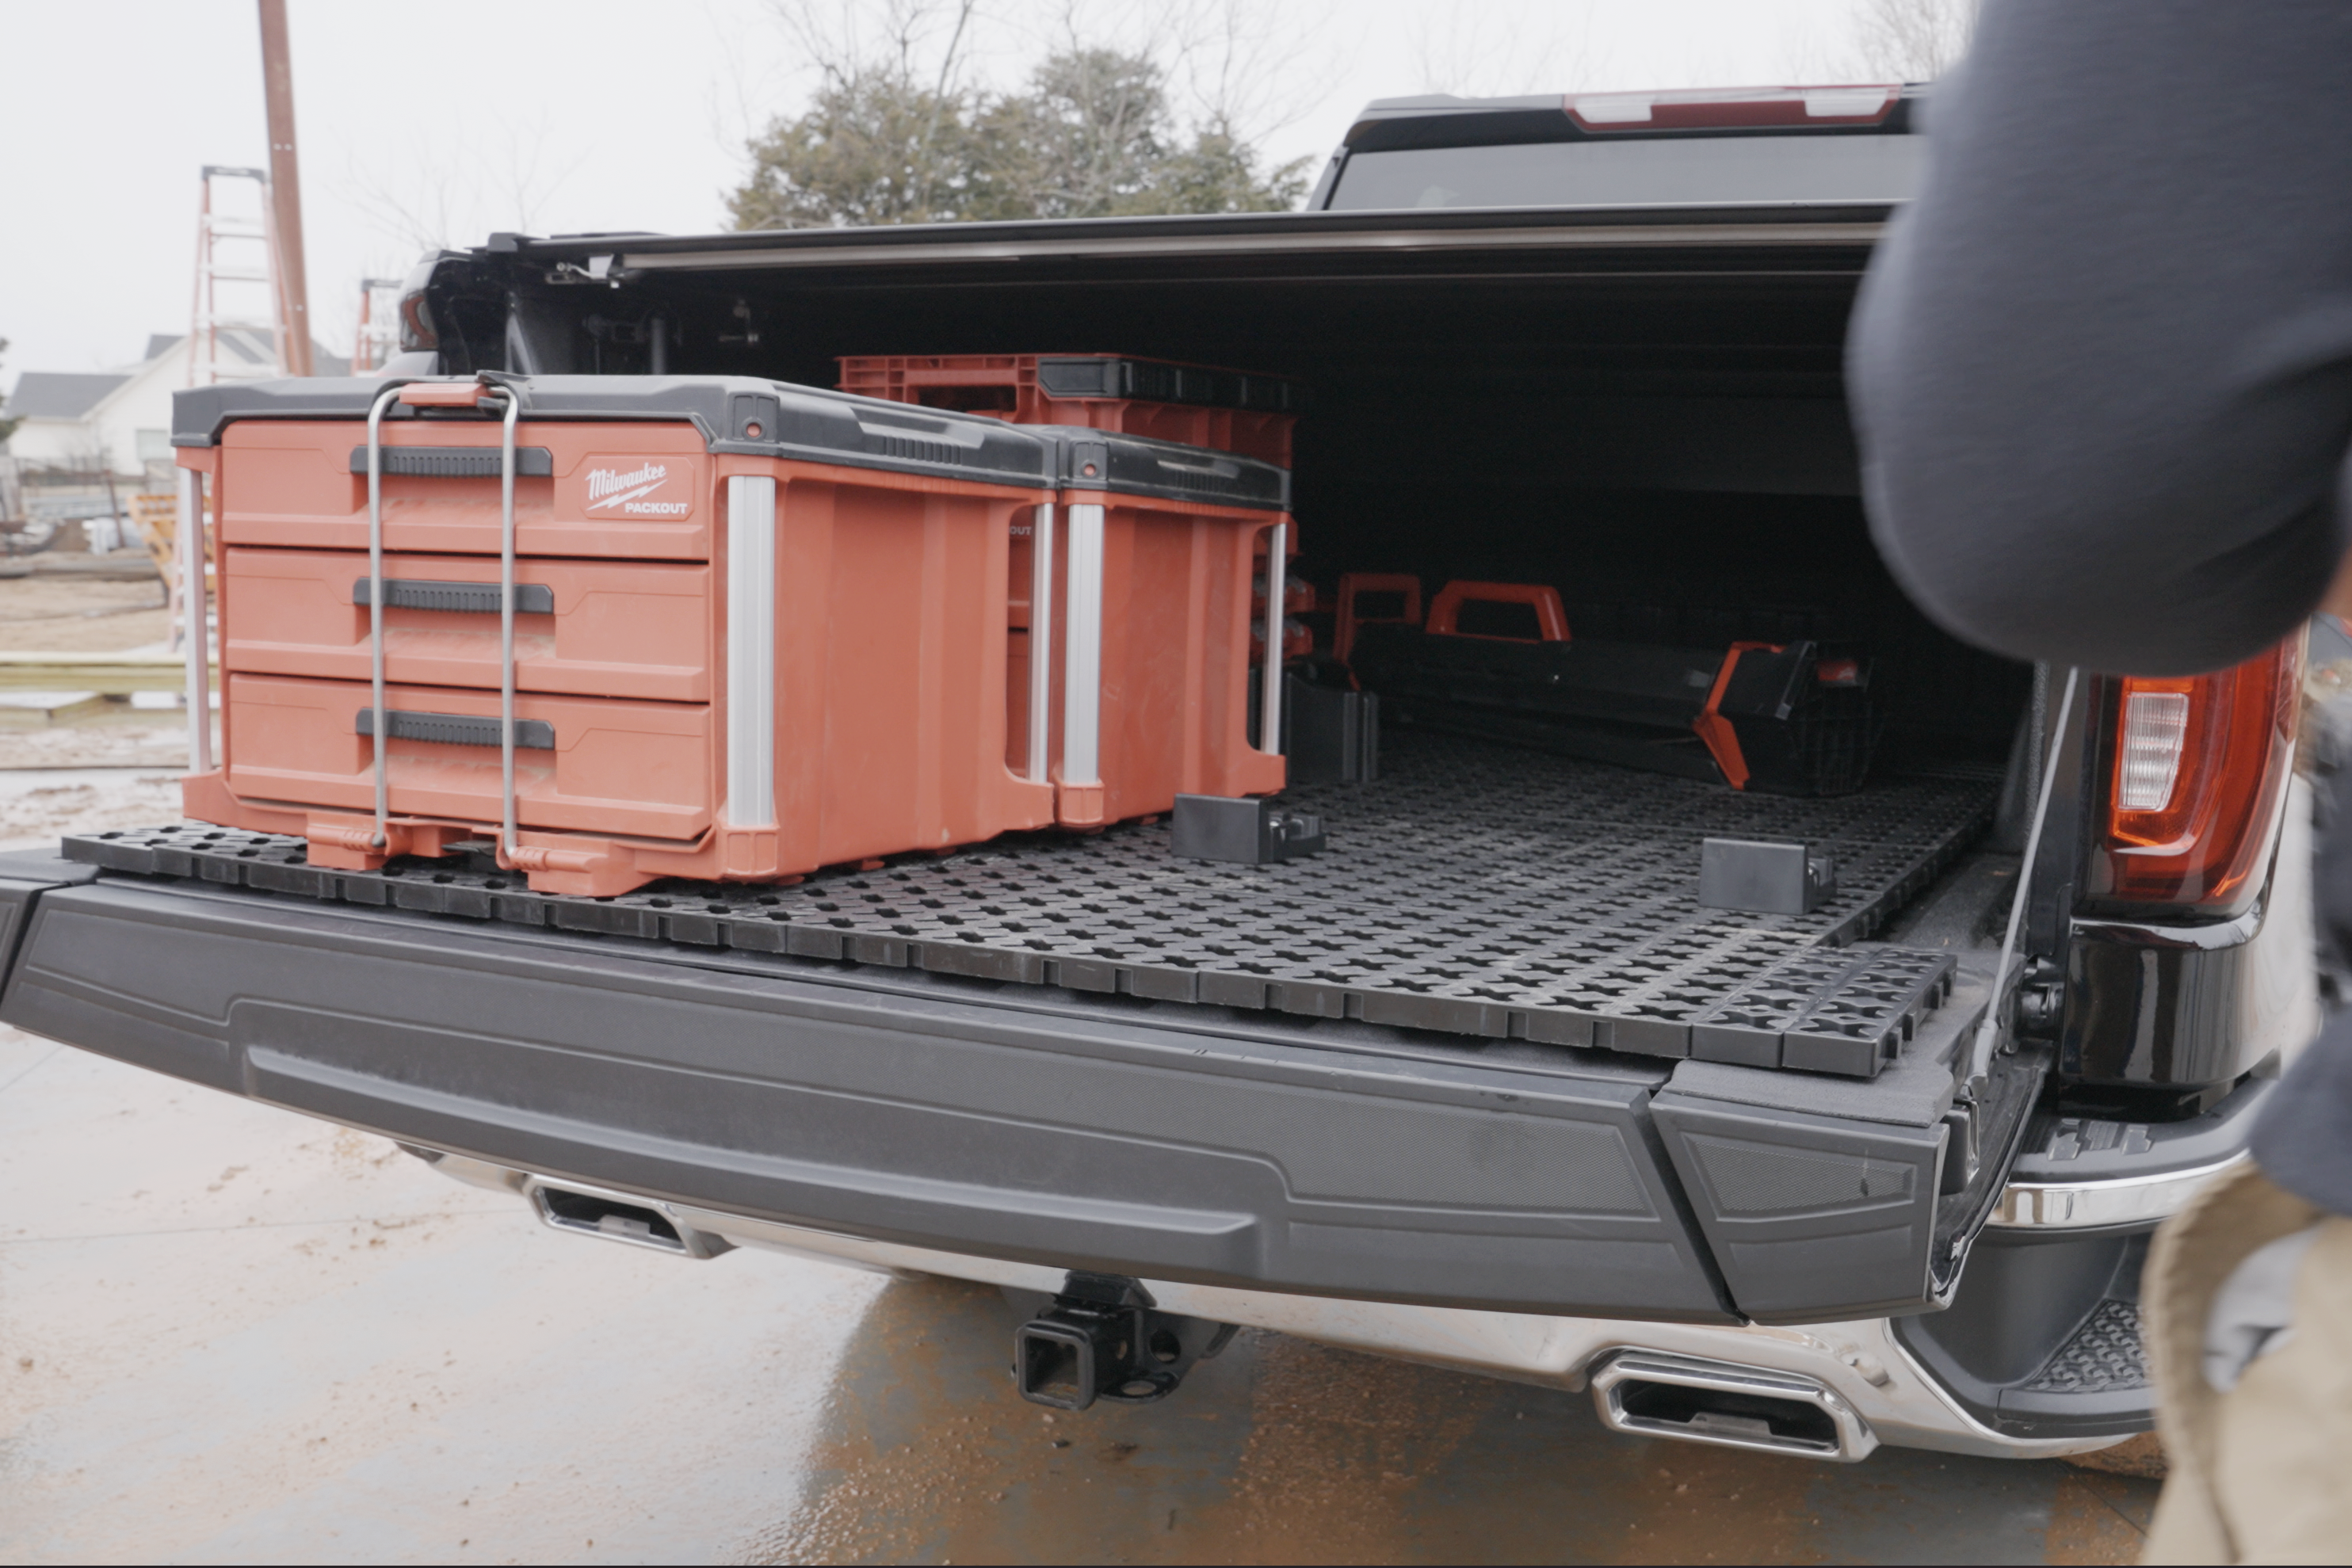 A Tmat truck bed mat slid onto a tailgate for unloading toolboxes on a job site.